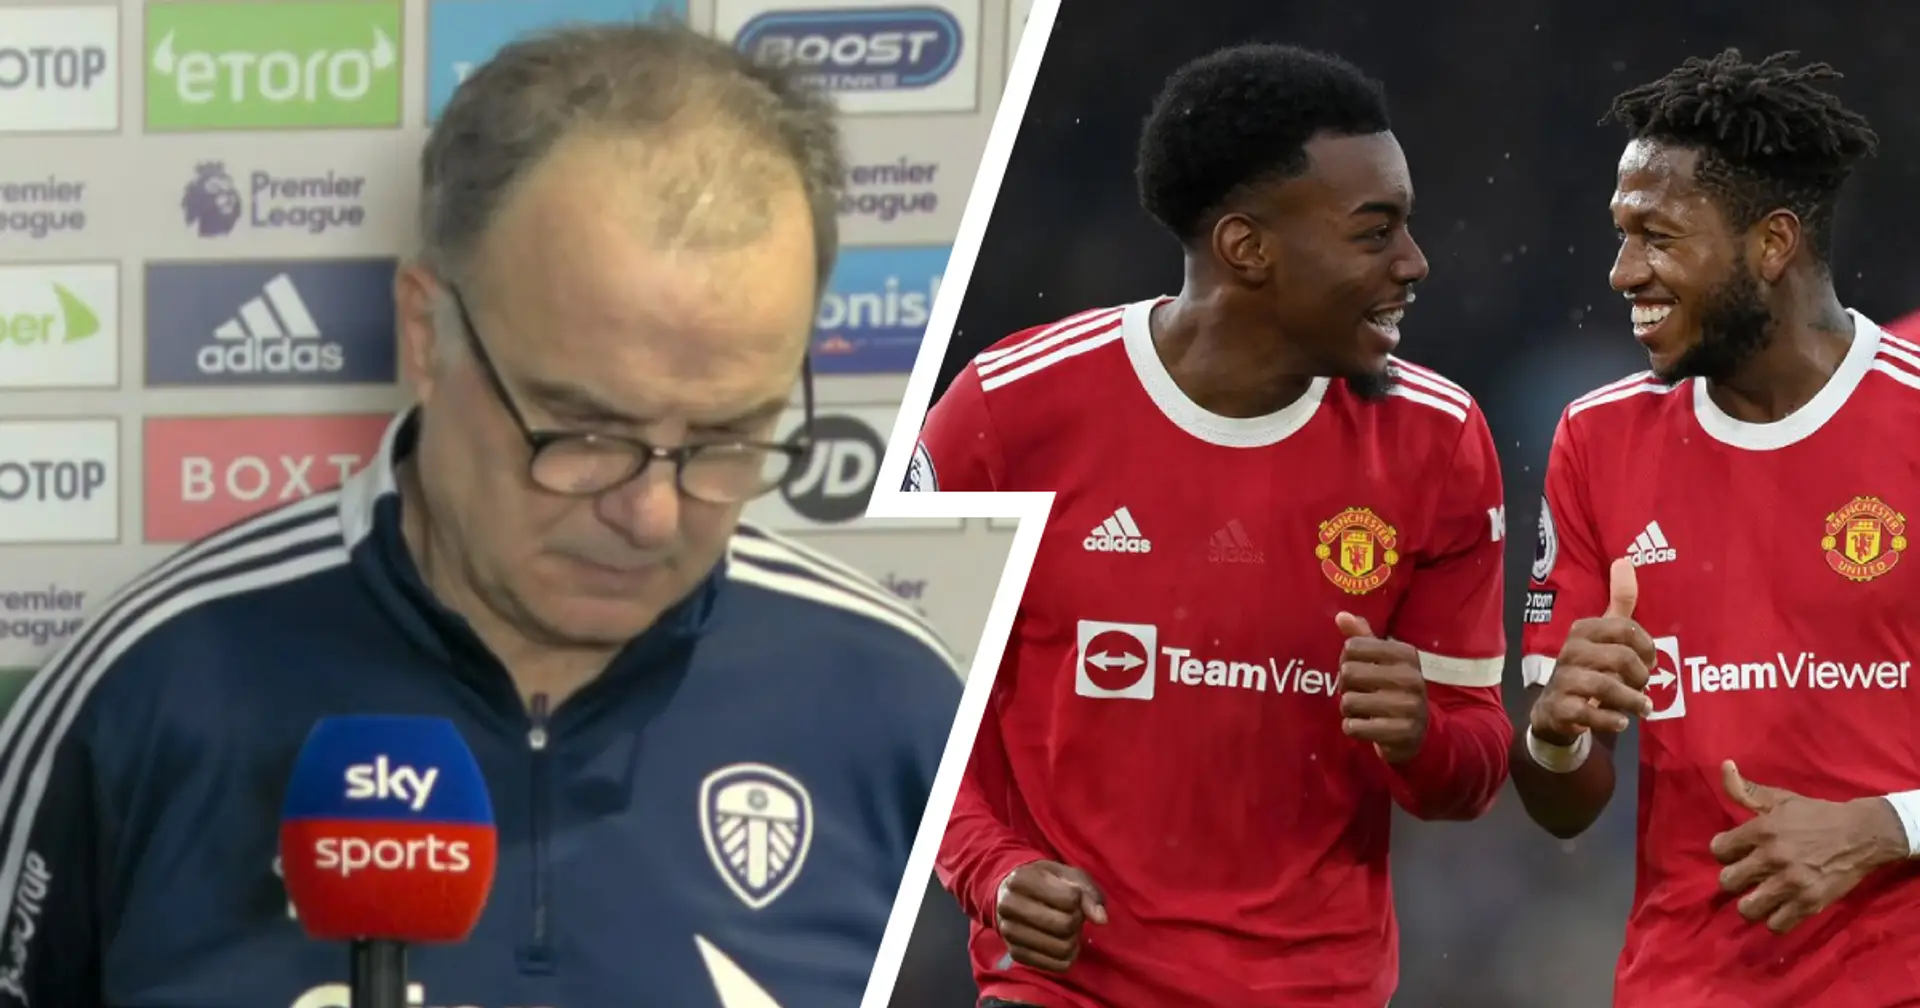 'Leeds stopped being in charge': Marcelo Bielsa laments losing 4-2 to Man United